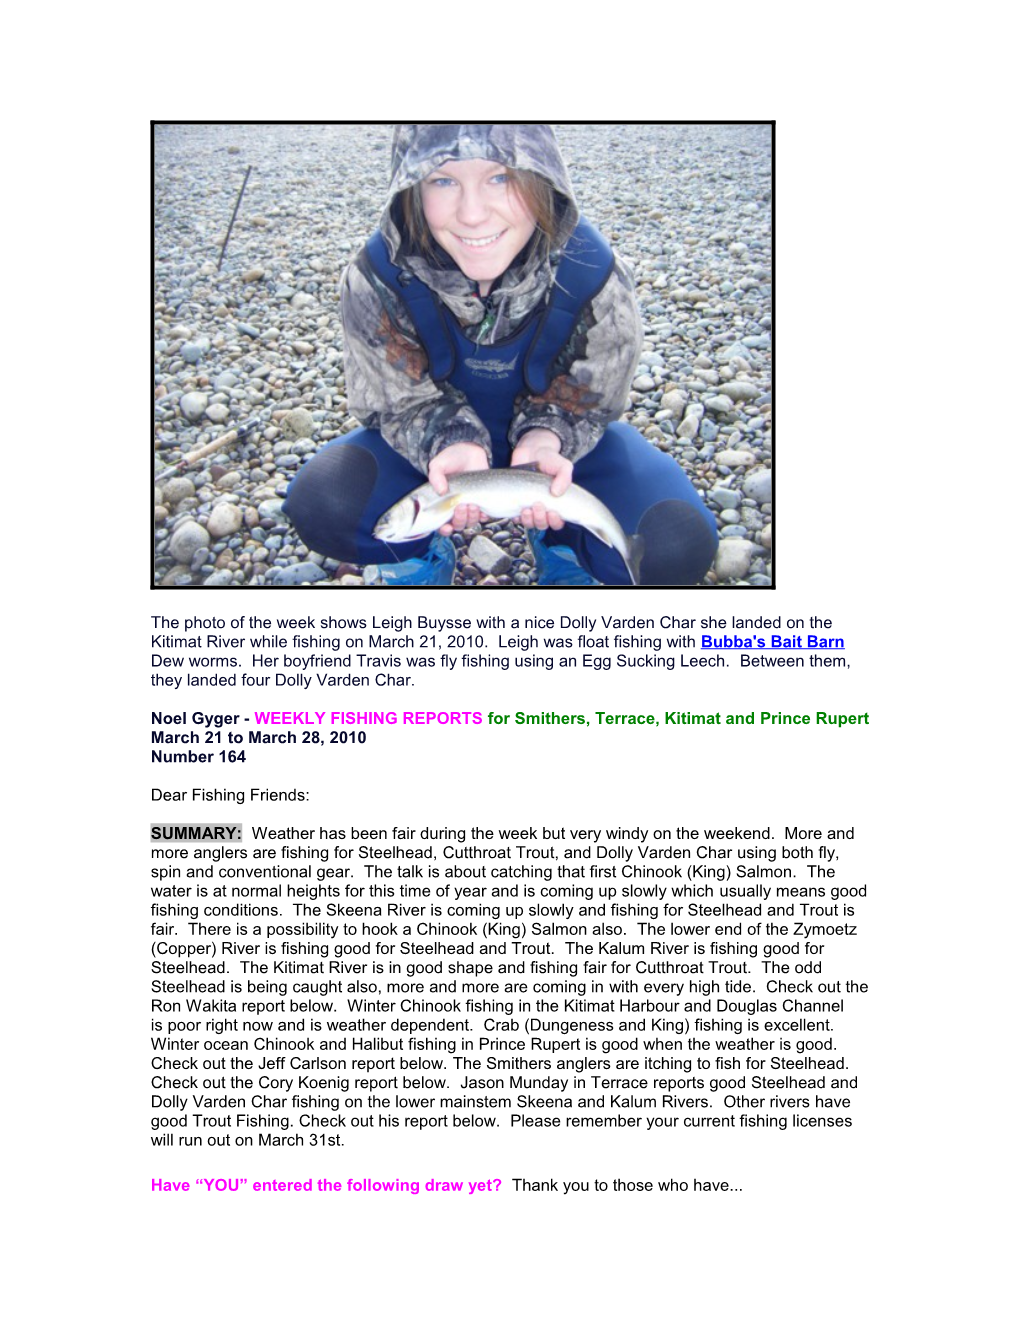 Noel Gyger - WEEKLY FISHING REPORTS for Smithers, Terrace, Kitimat and Prince Rupert s1